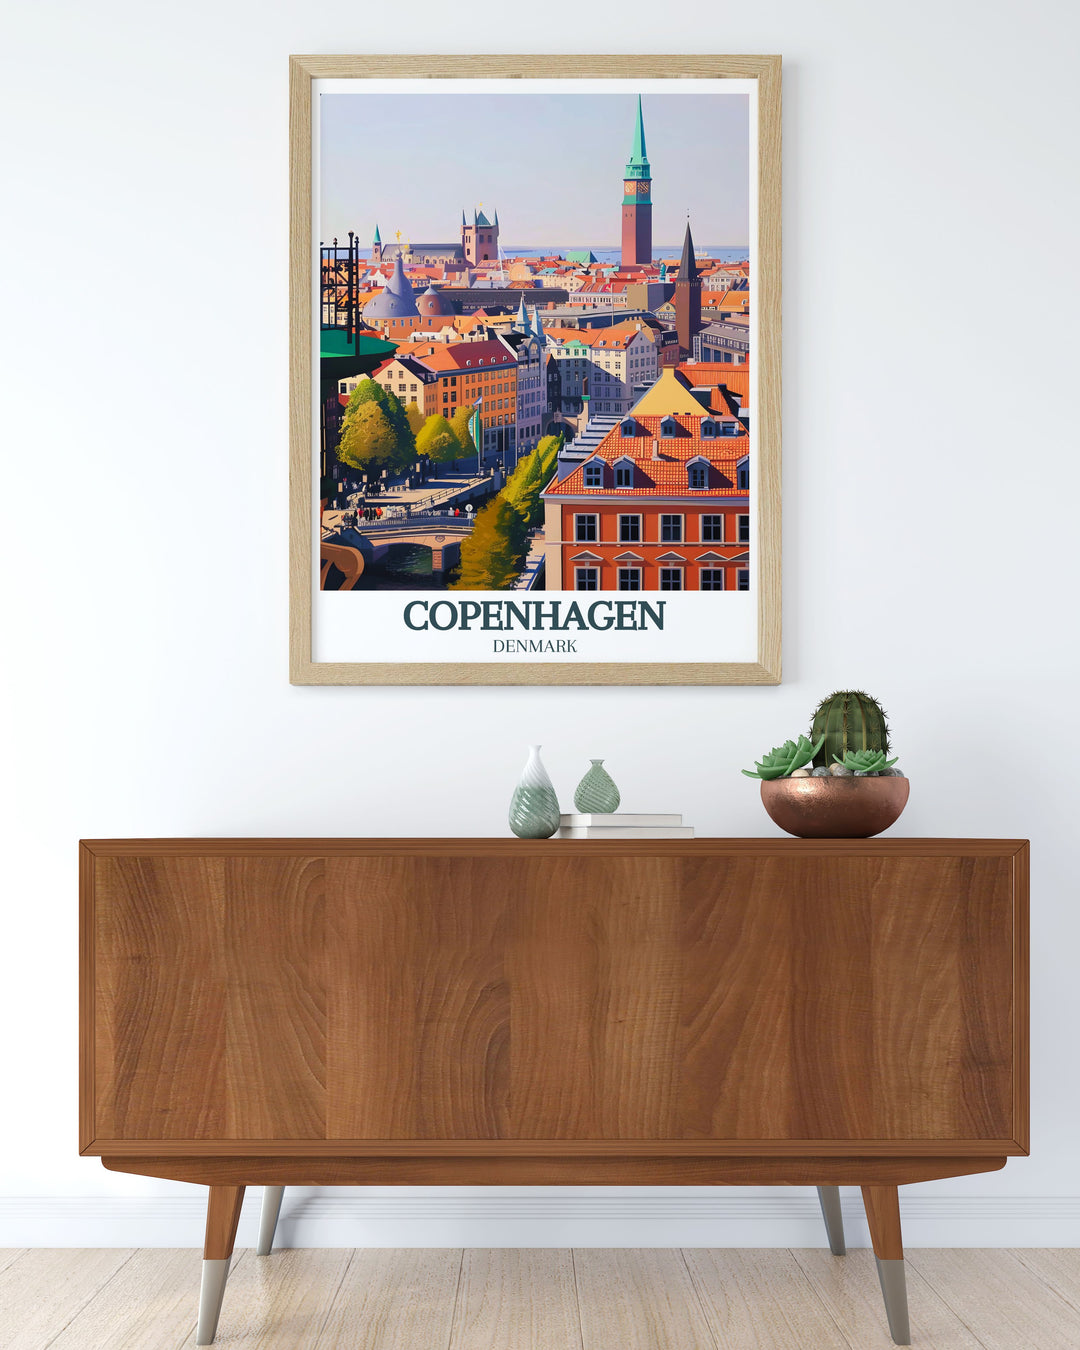 This vintage print of The Round Tower view, Copenhagen city hall from Copenhagen is a timeless piece of wall art. Ideal for adding a historic and sophisticated touch to your space.